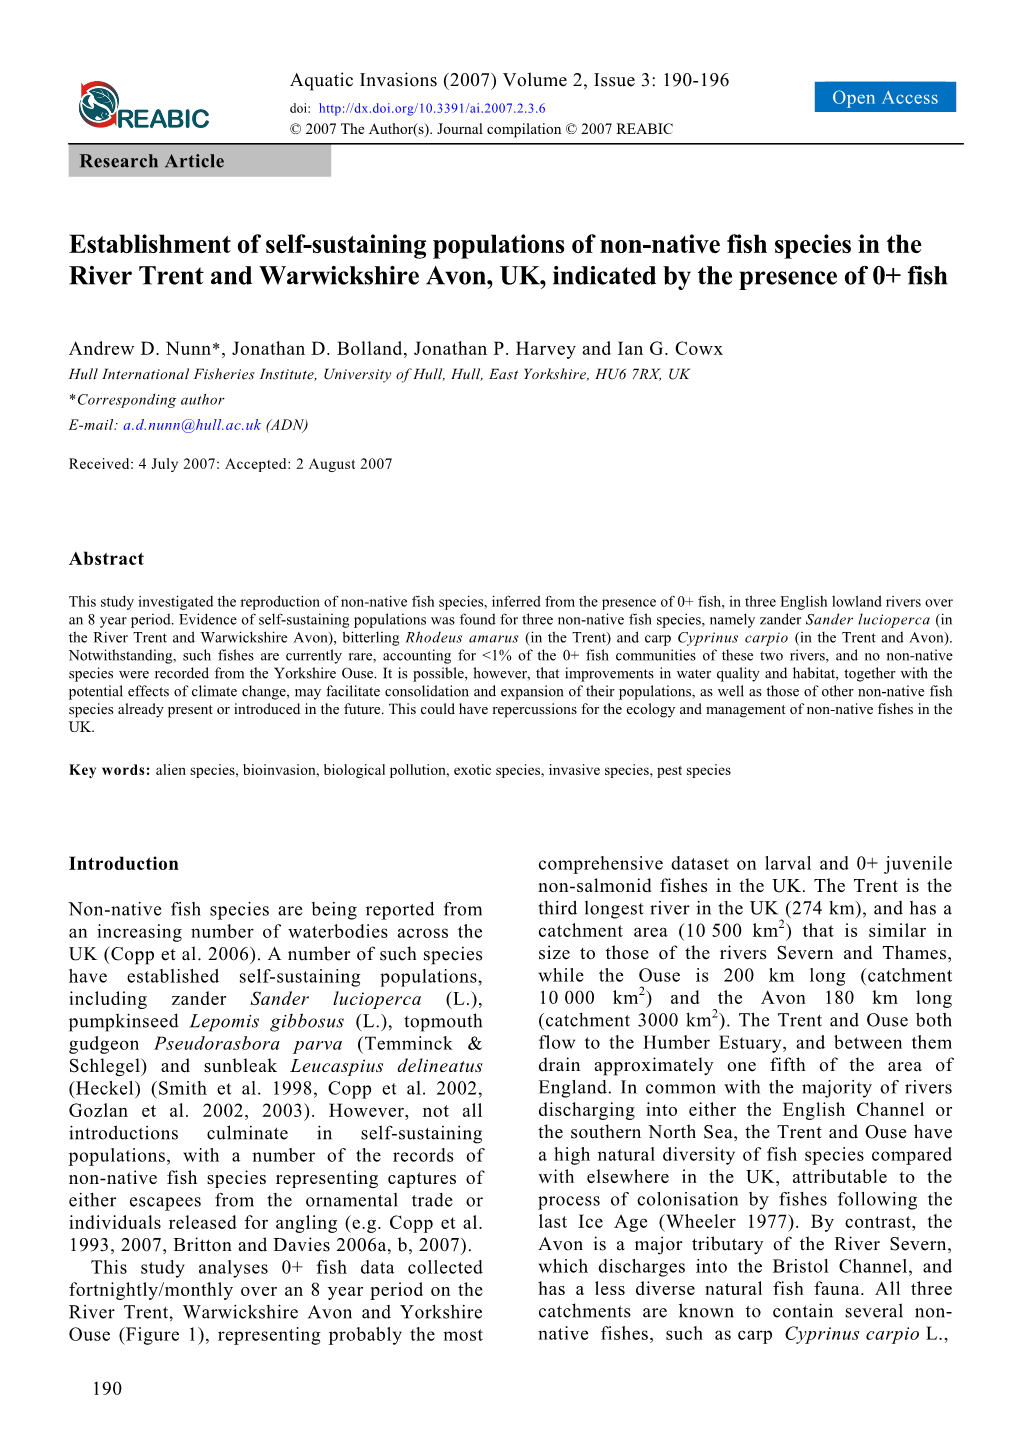 Establishment of Self-Sustaining Populations of Non-Native Fish Species in the River Trent and Warwickshire Avon, UK, Indicated by the Presence of 0+ Fish